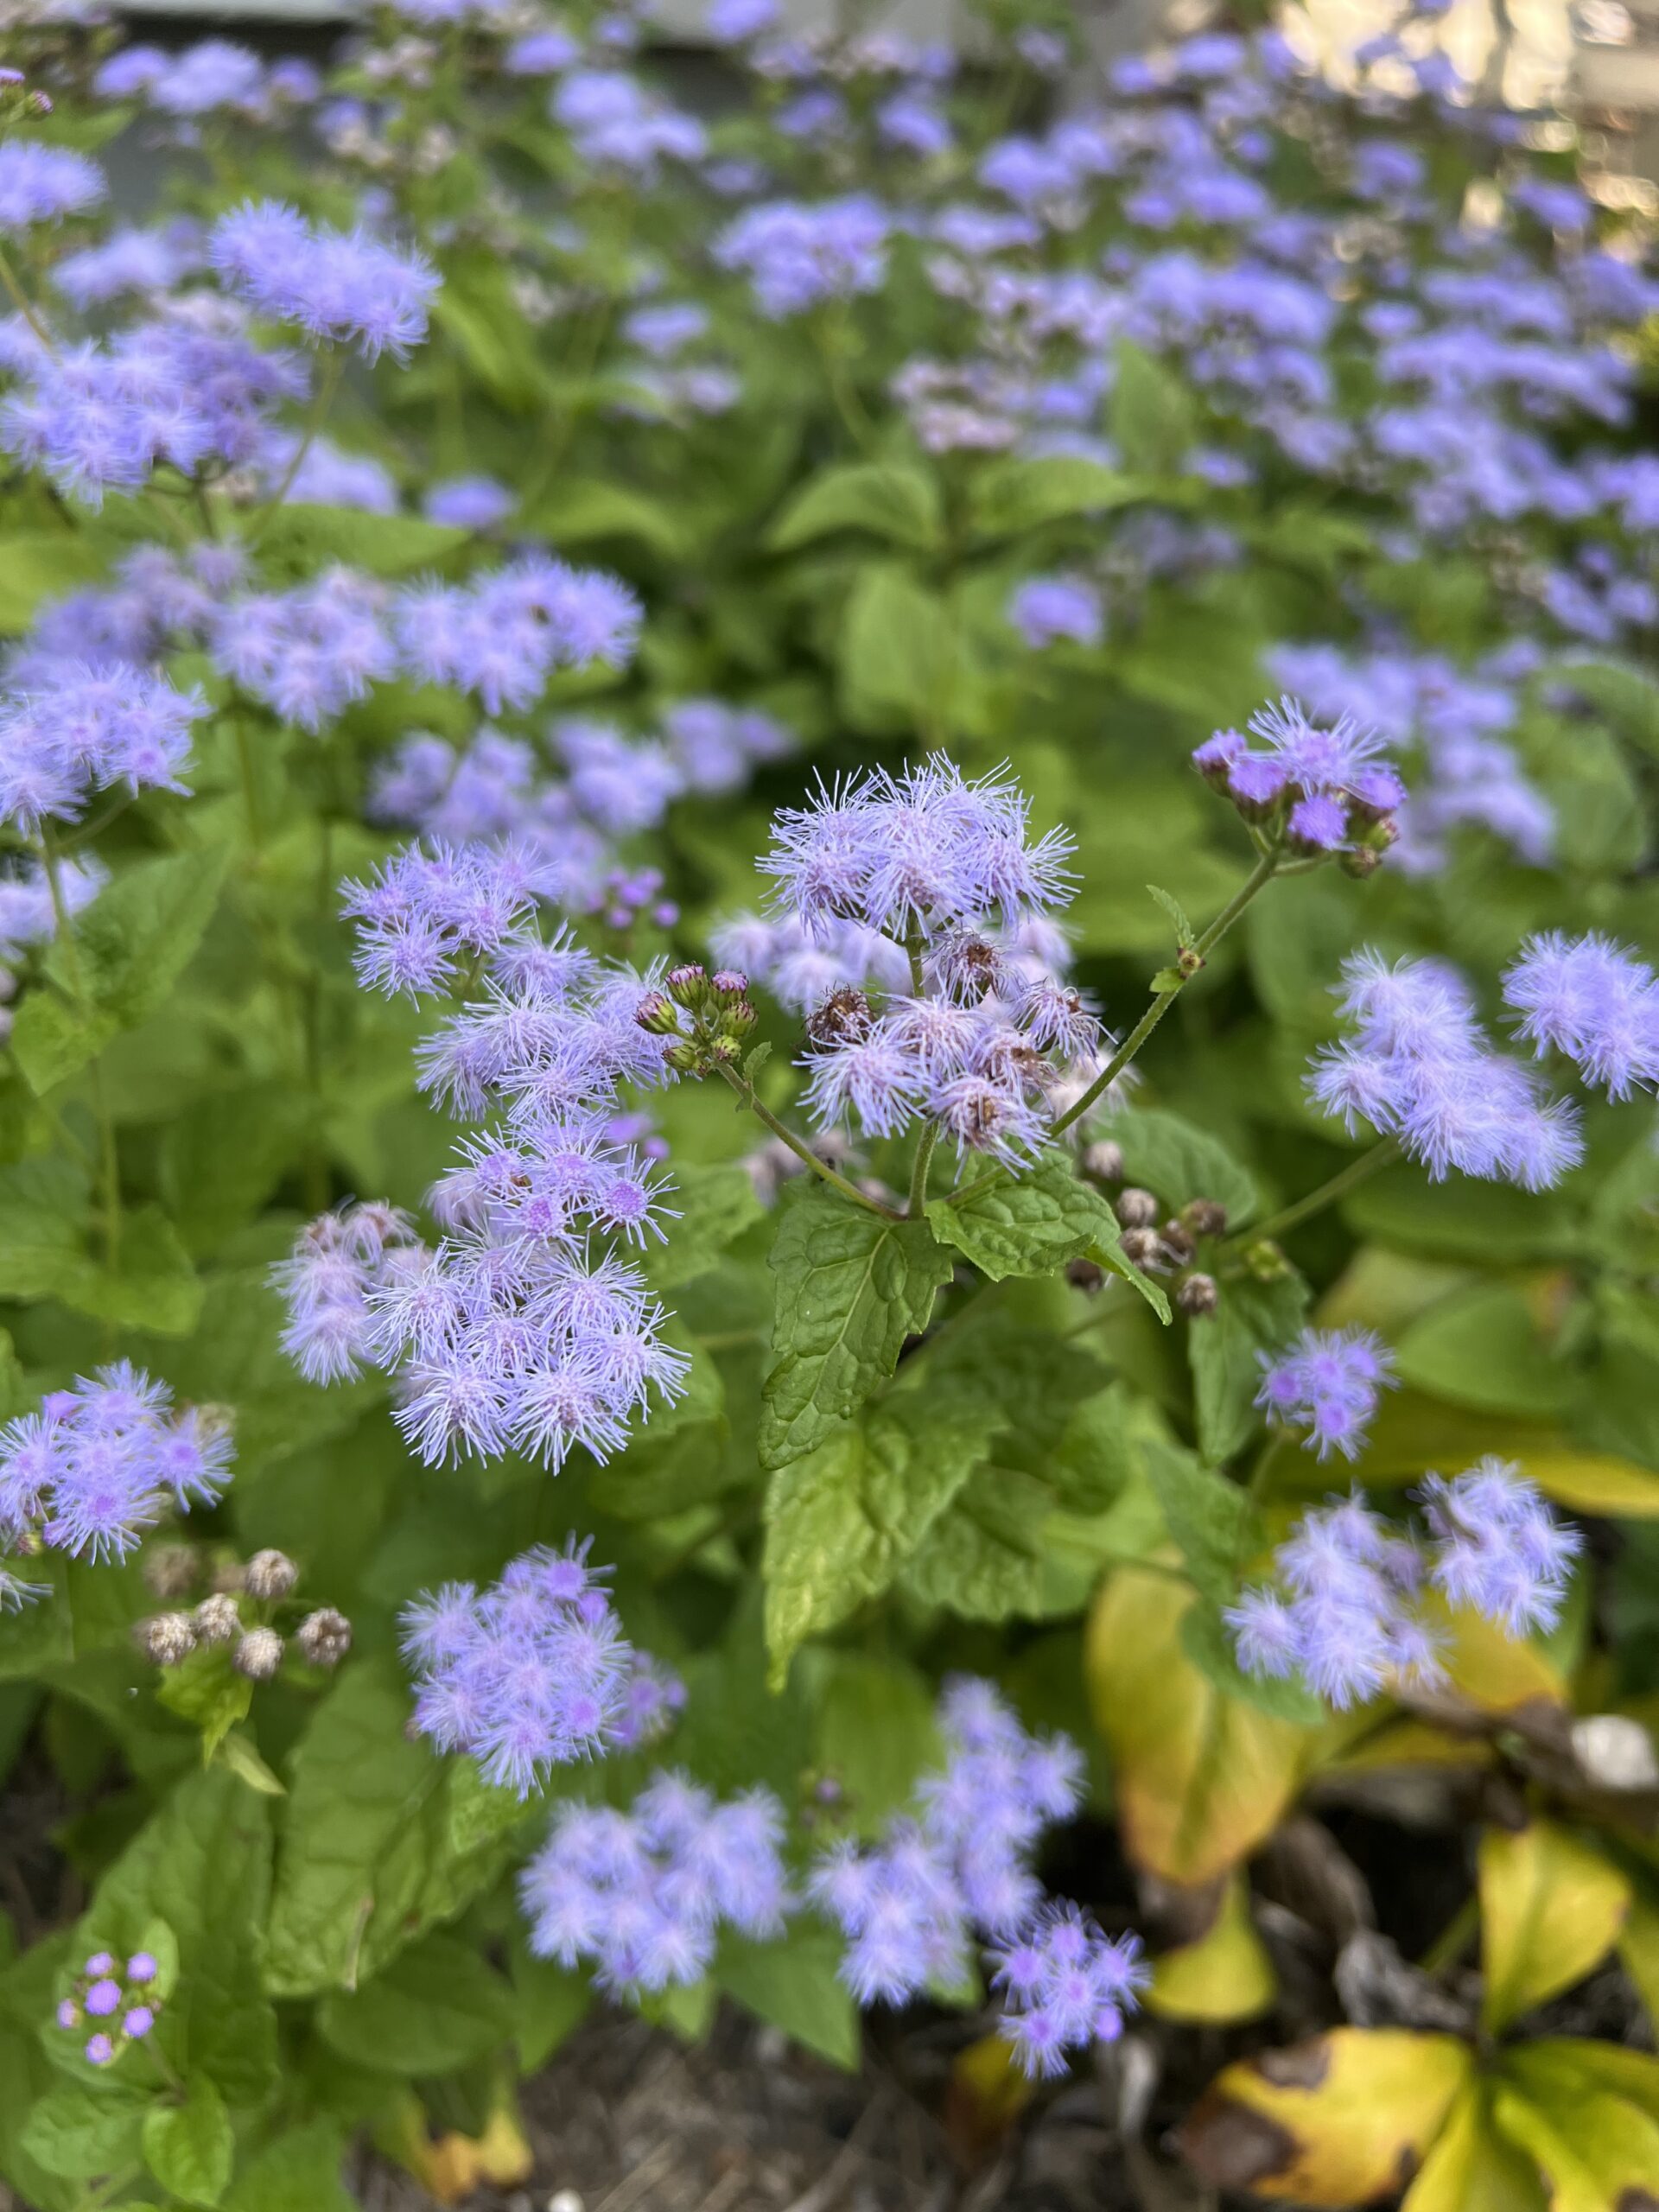 The cool tones of blue mist flower seem to glow agains the background of green foliage